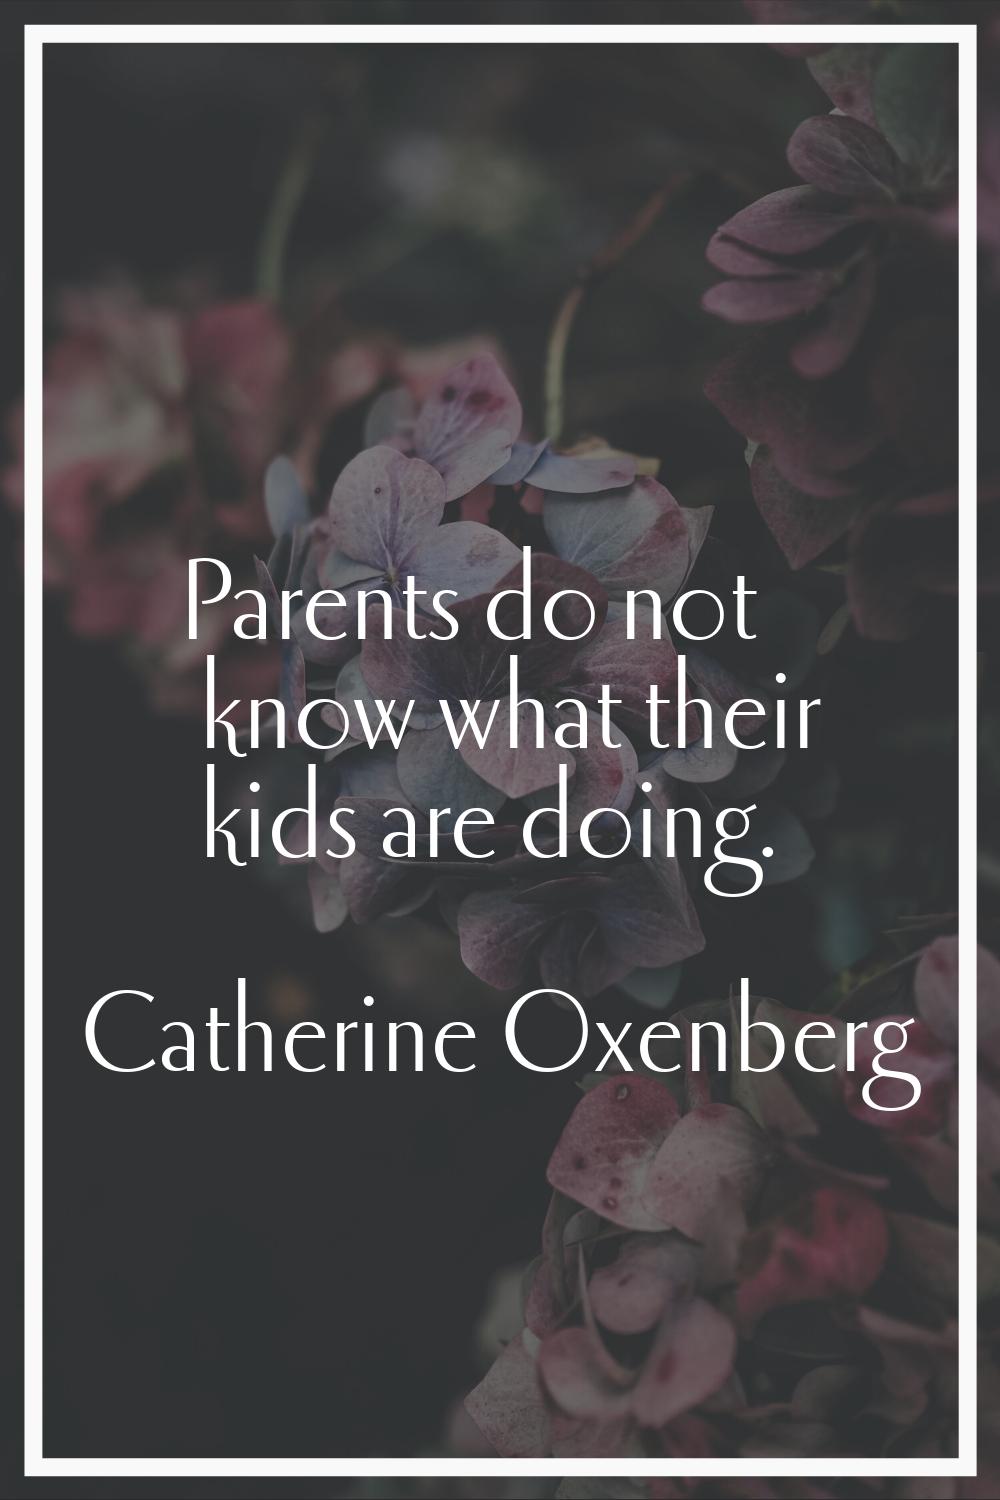 Parents do not know what their kids are doing.